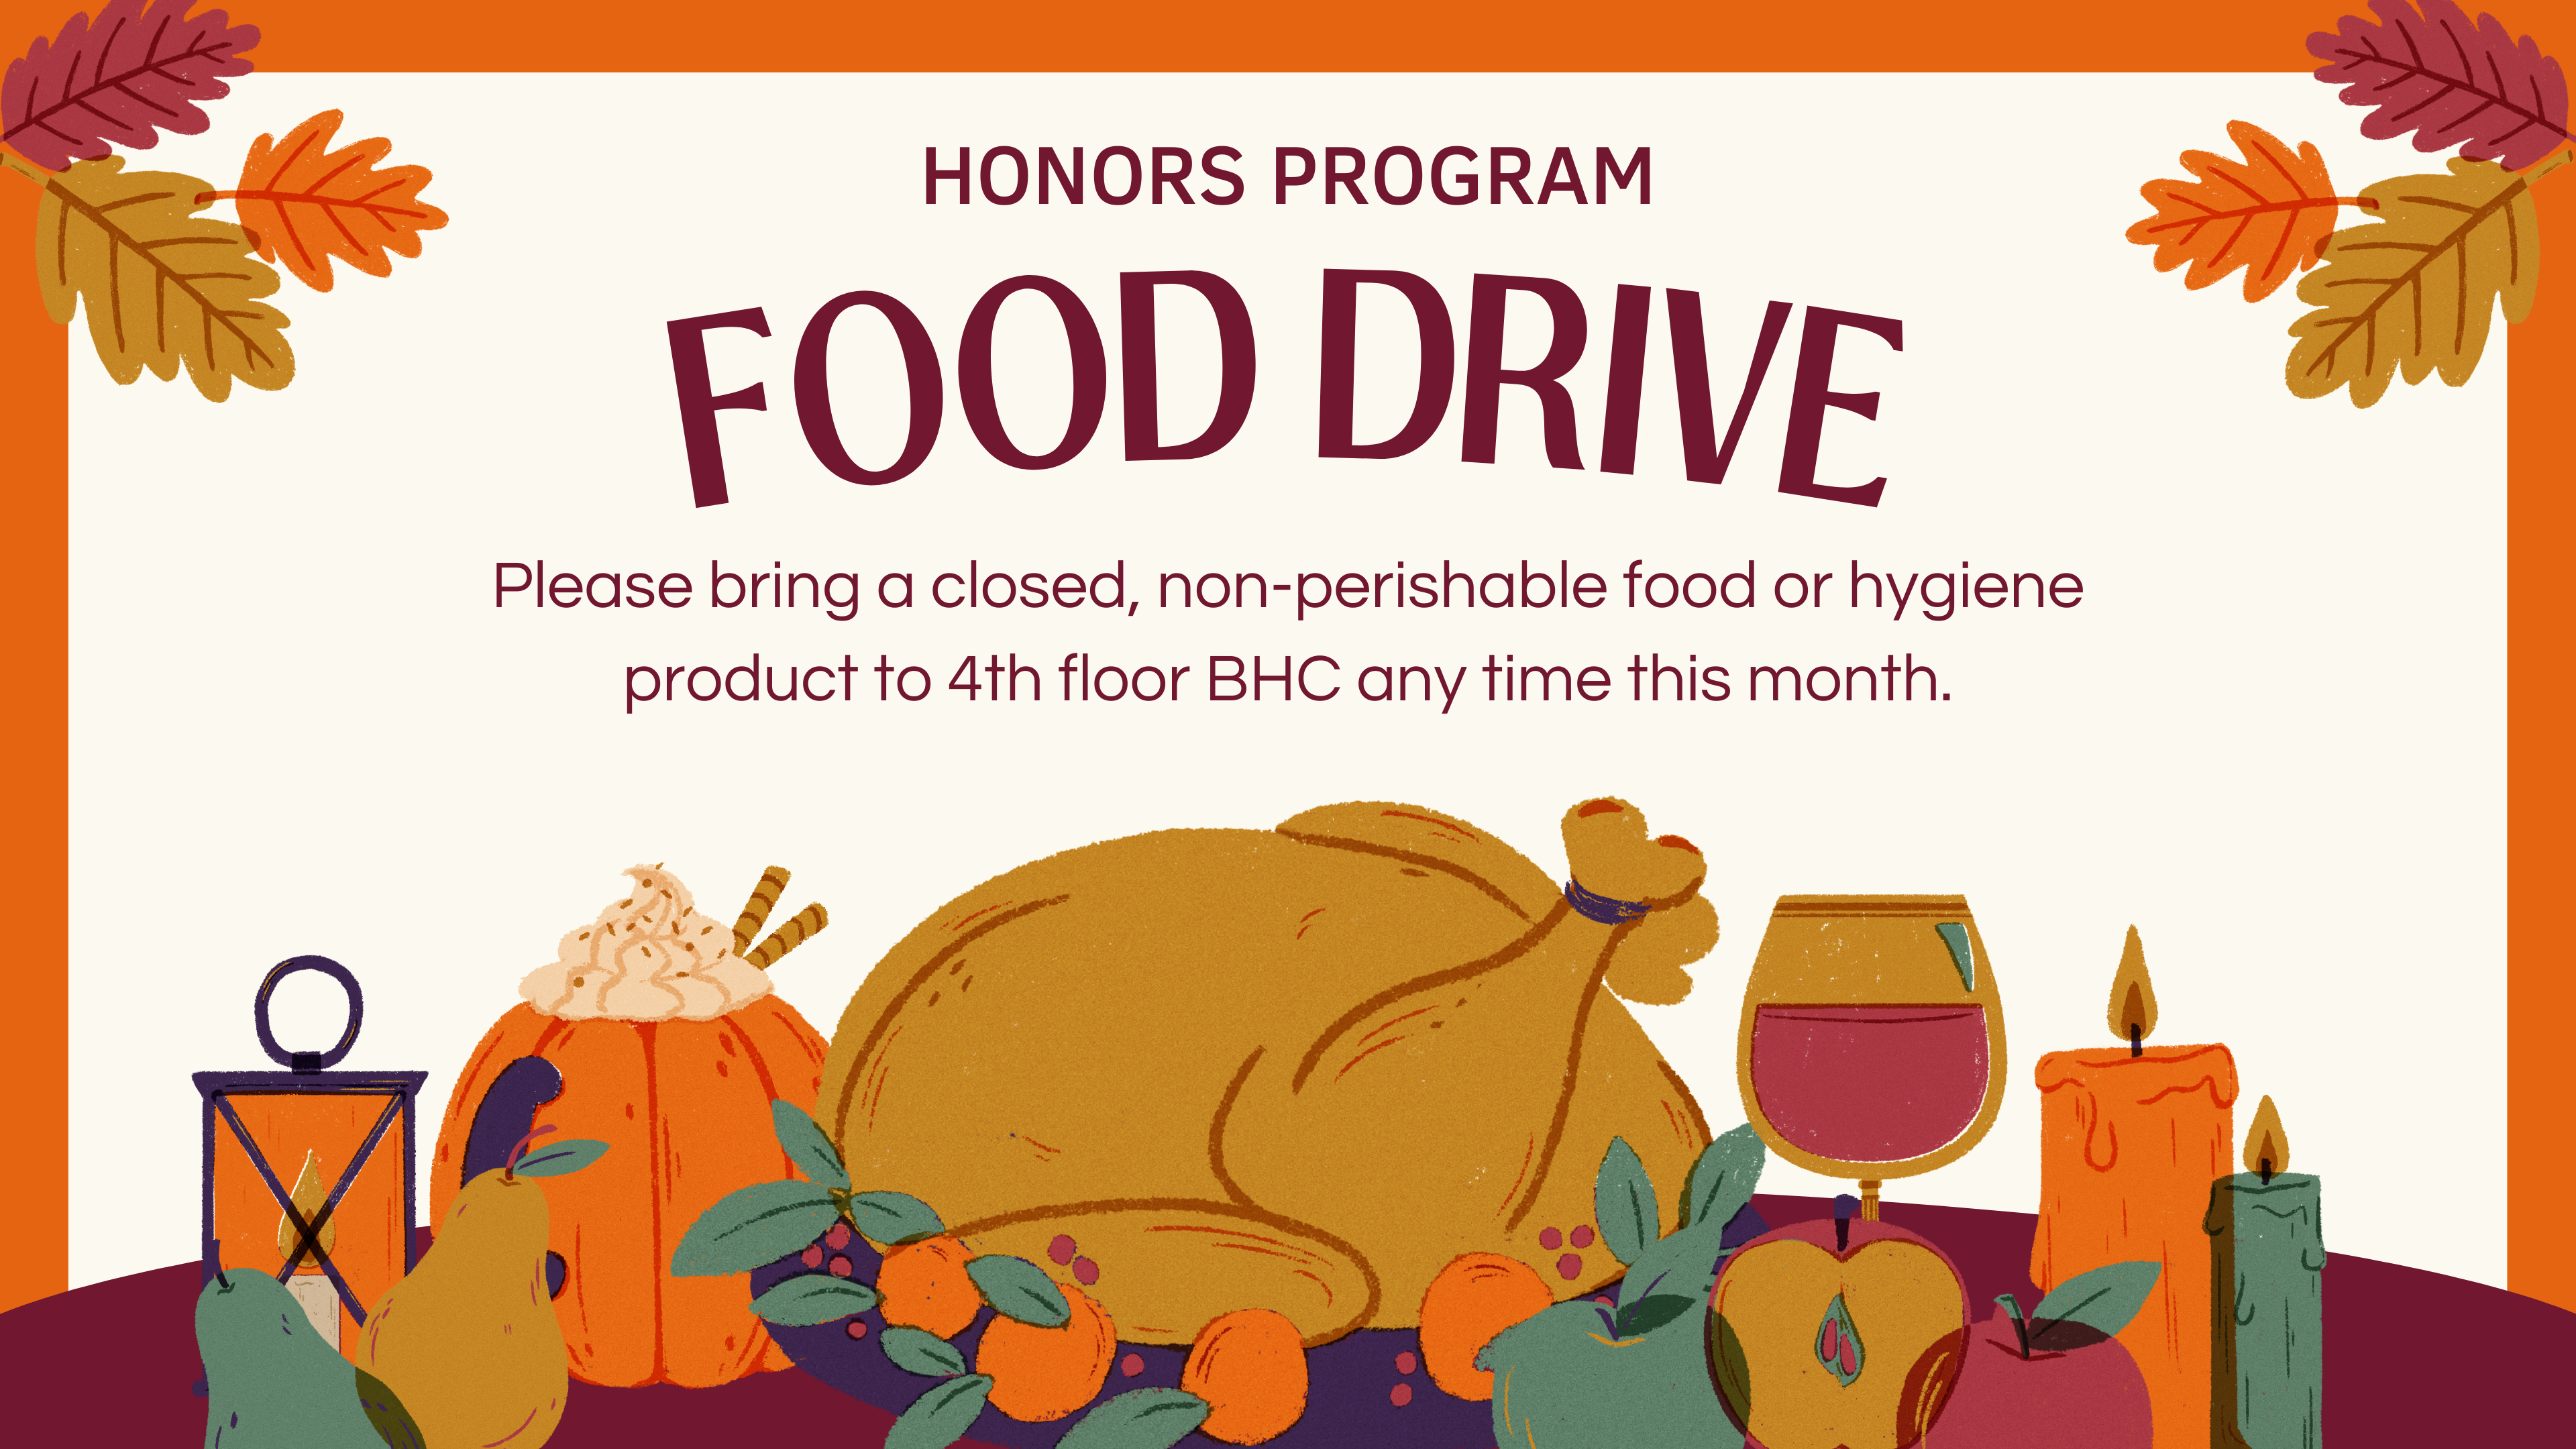 Honors Program Food Drive! Please bring a closed, non-perishable food or hygiene product to 4th floor BHC any time this month.